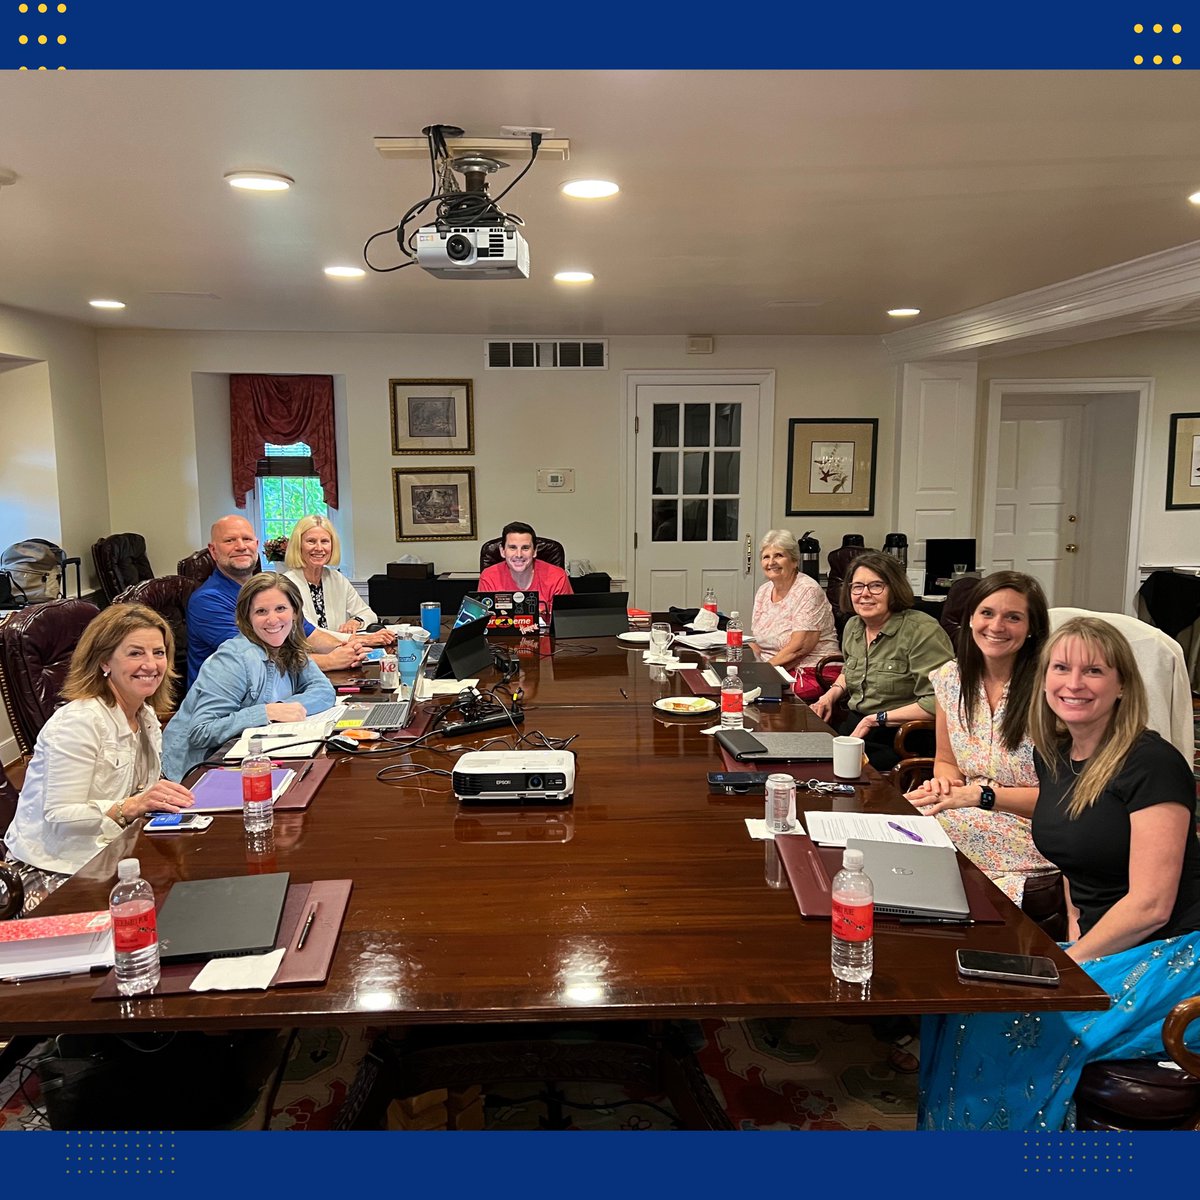 Changing the Game! Each July we evaluate, strategize, and plan for the year!
Get ready for game-changing programs that:
1. Improve Teaching Strategies
2. Create Exciting and Engaging Lessons
3. Enhance the Learning Experience
#CEEEPlanners #EducatorsUnite #TeacherCommunity #netde